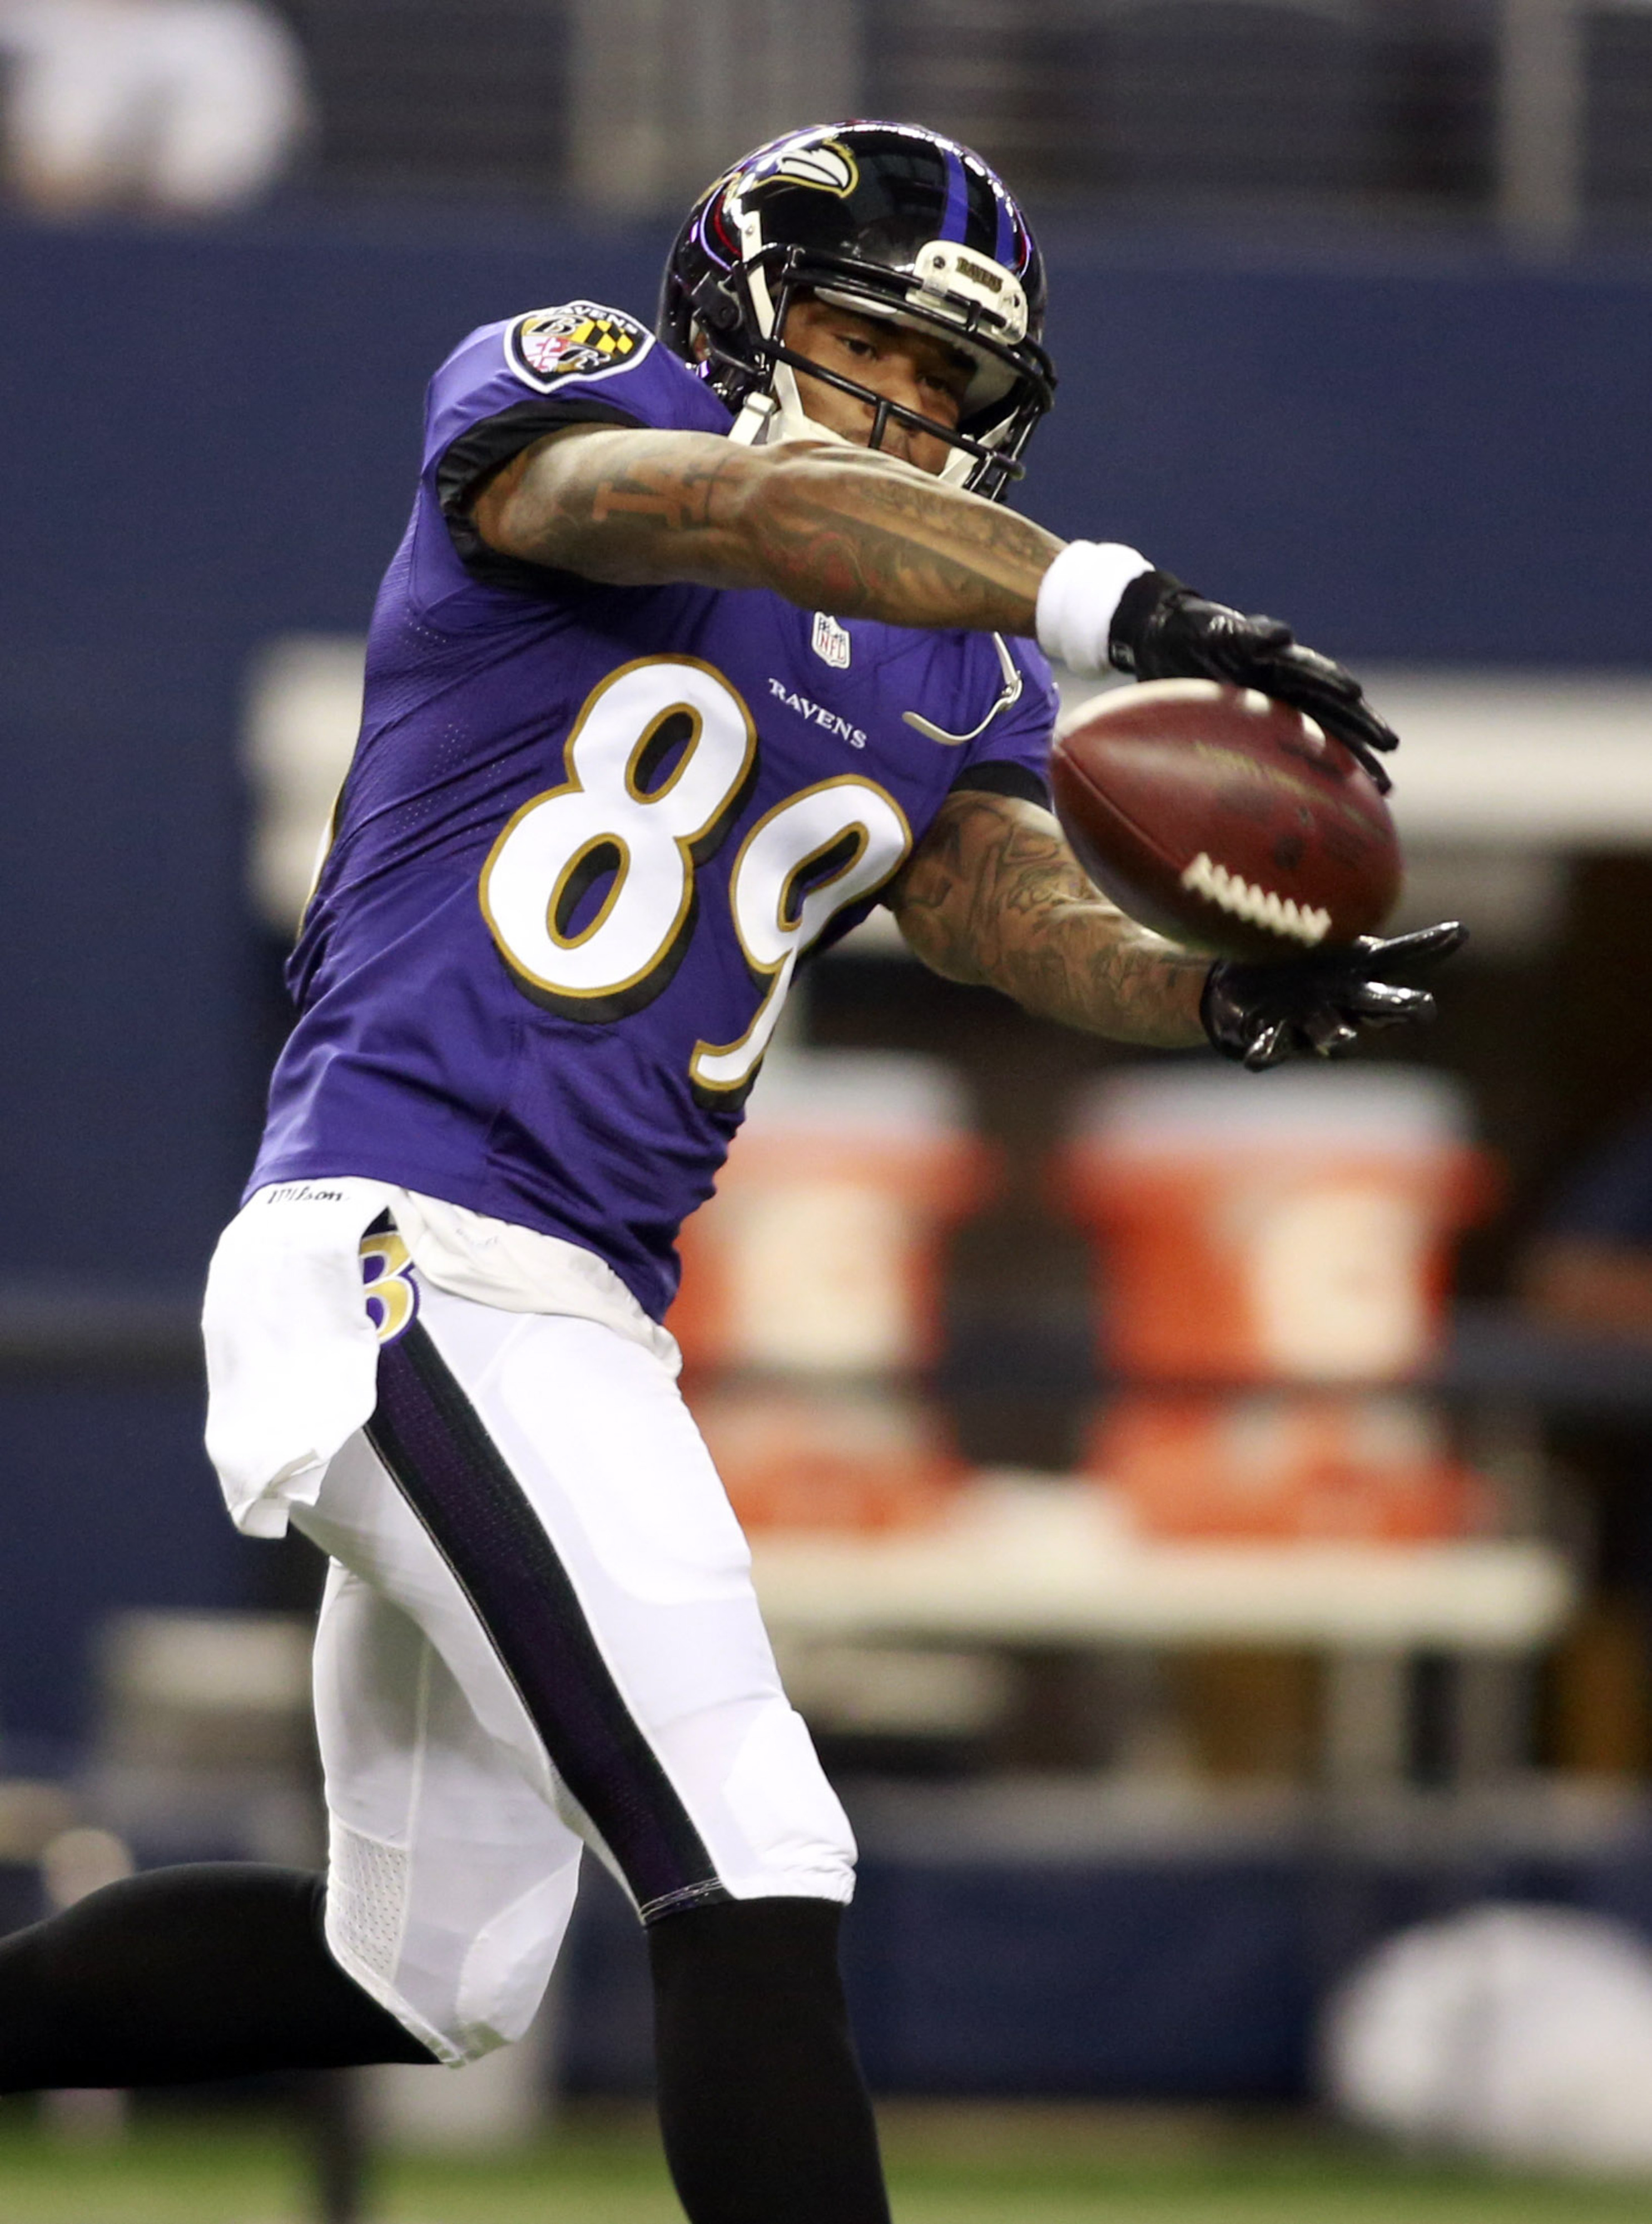 Steve Smith catches a pass on 4th down during his amazing outing against the Panthers.